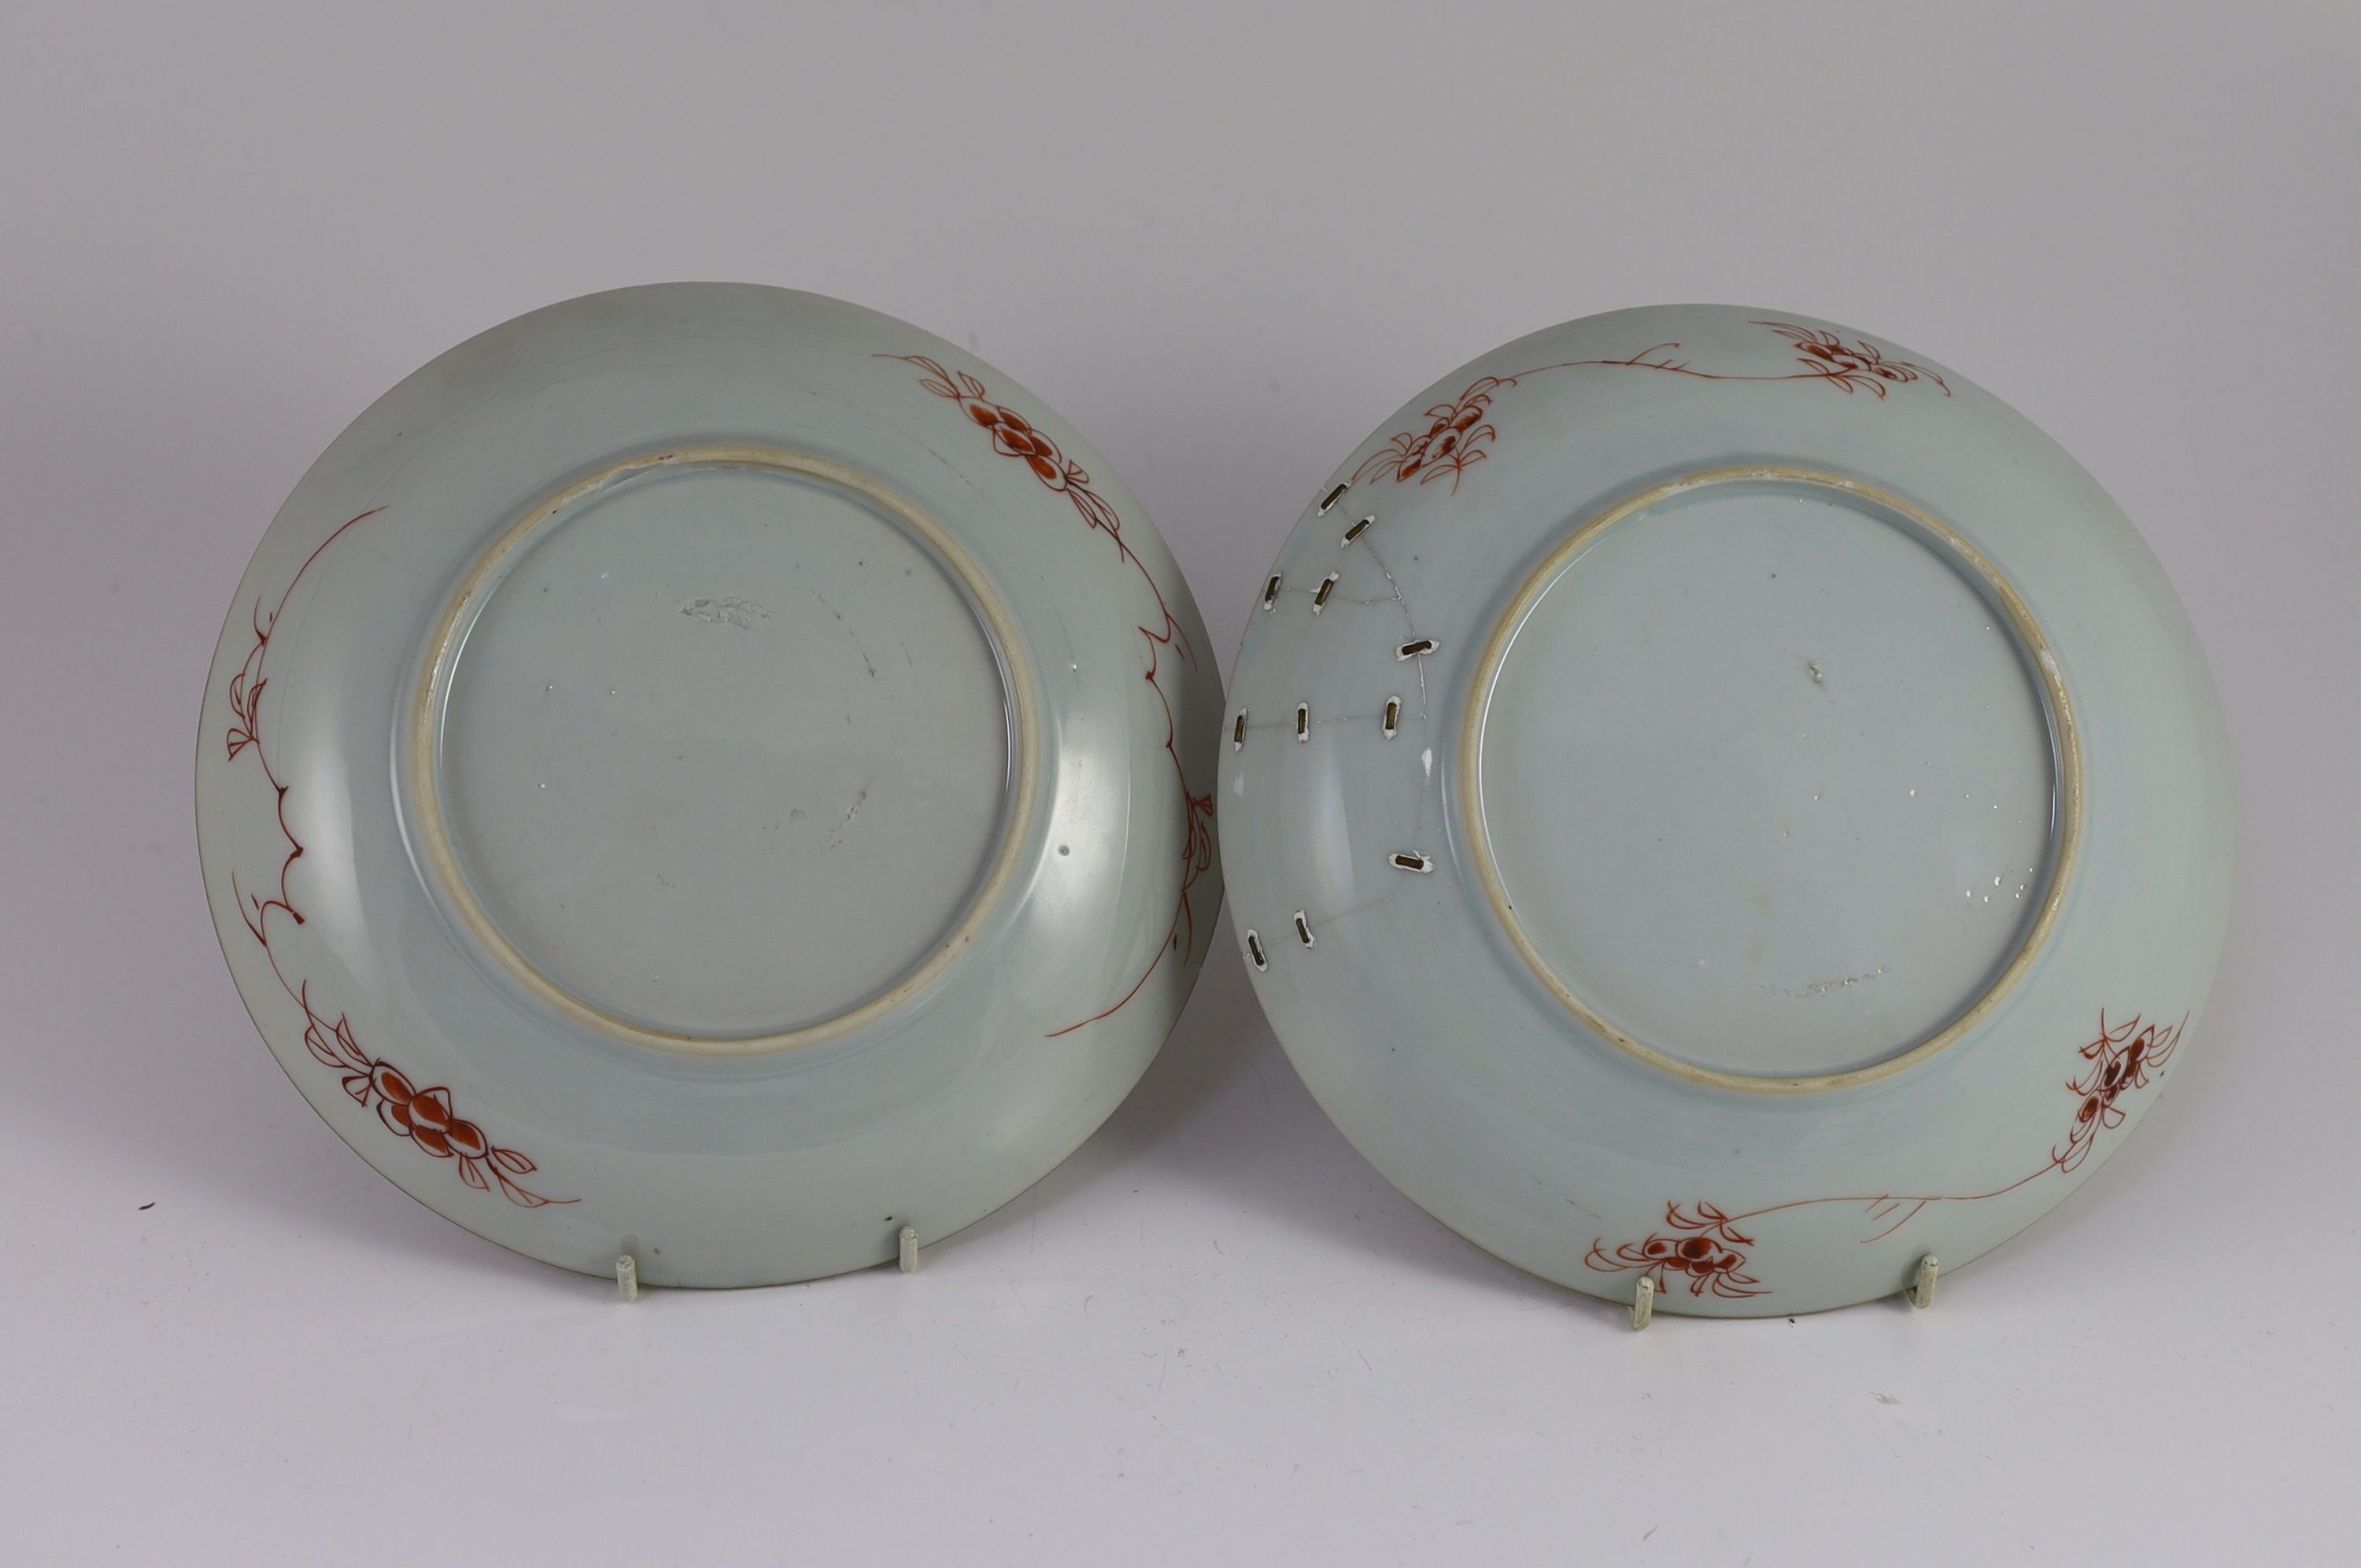 A pair of Chinese famille rose dishes, early Qianlong period, 22 cm diameter, one broken and repaired